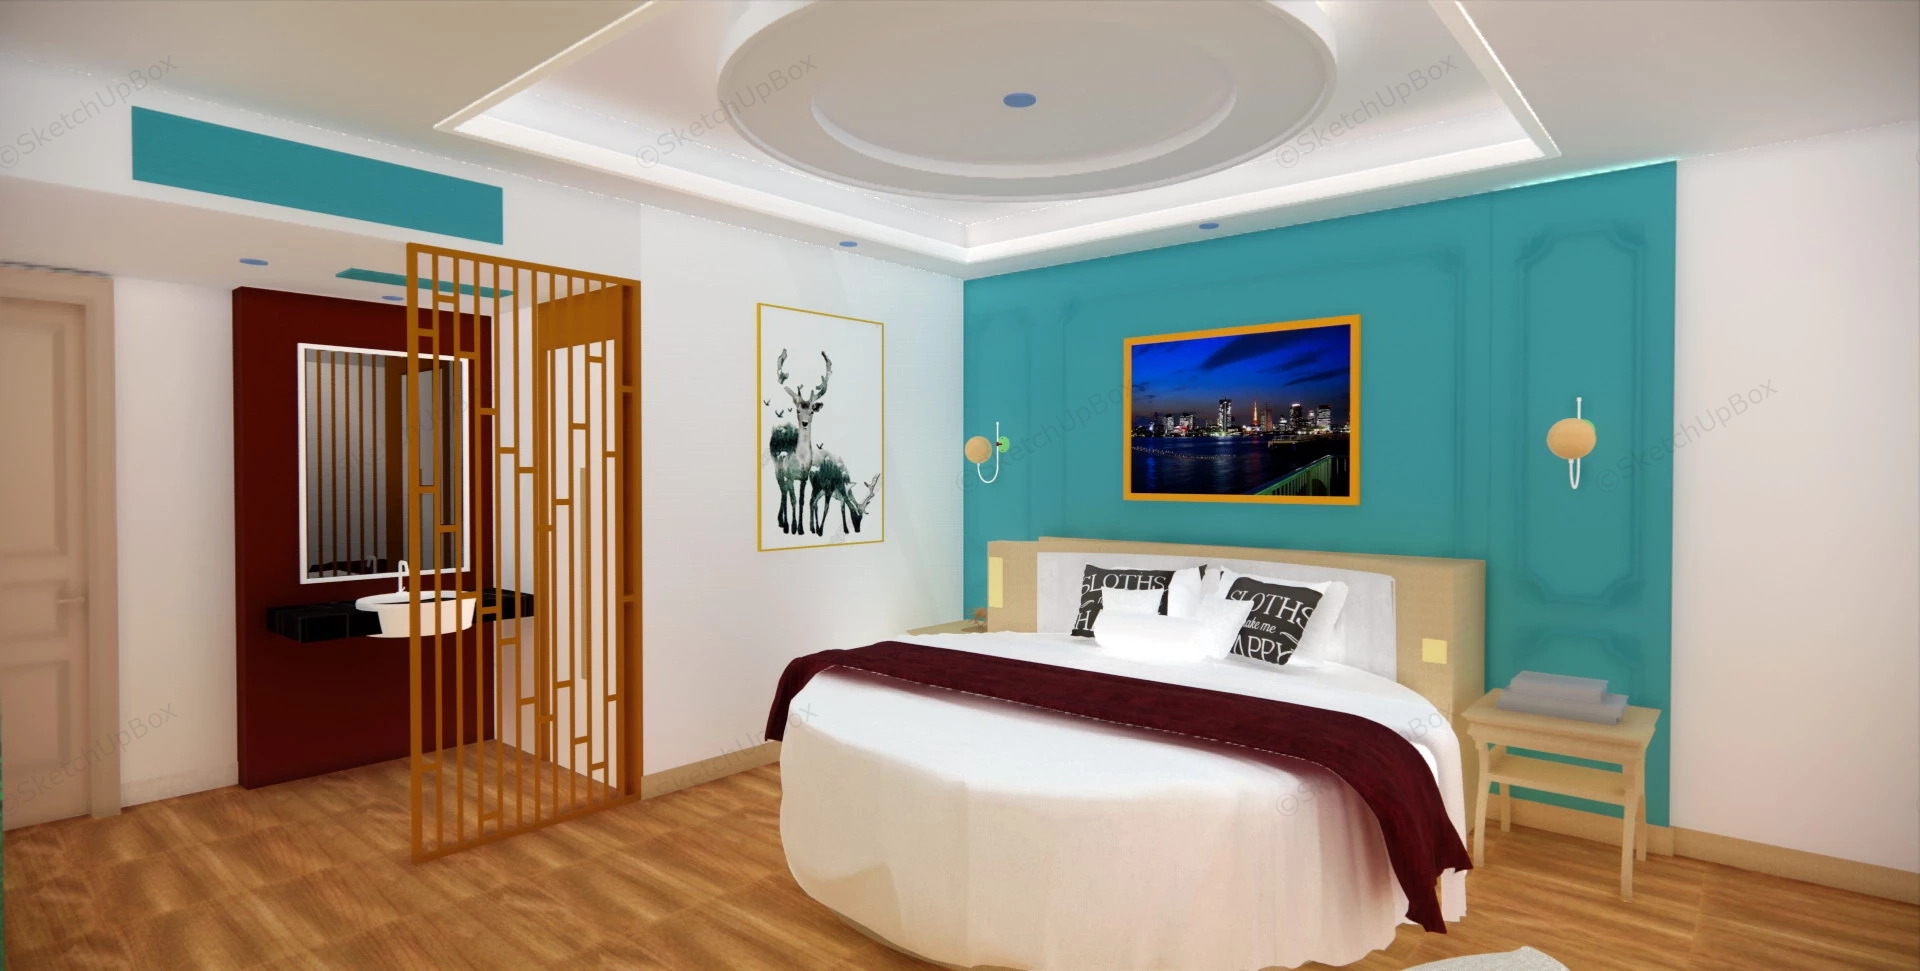 Hotel Round Bed Room Idea sketchup model preview - SketchupBox